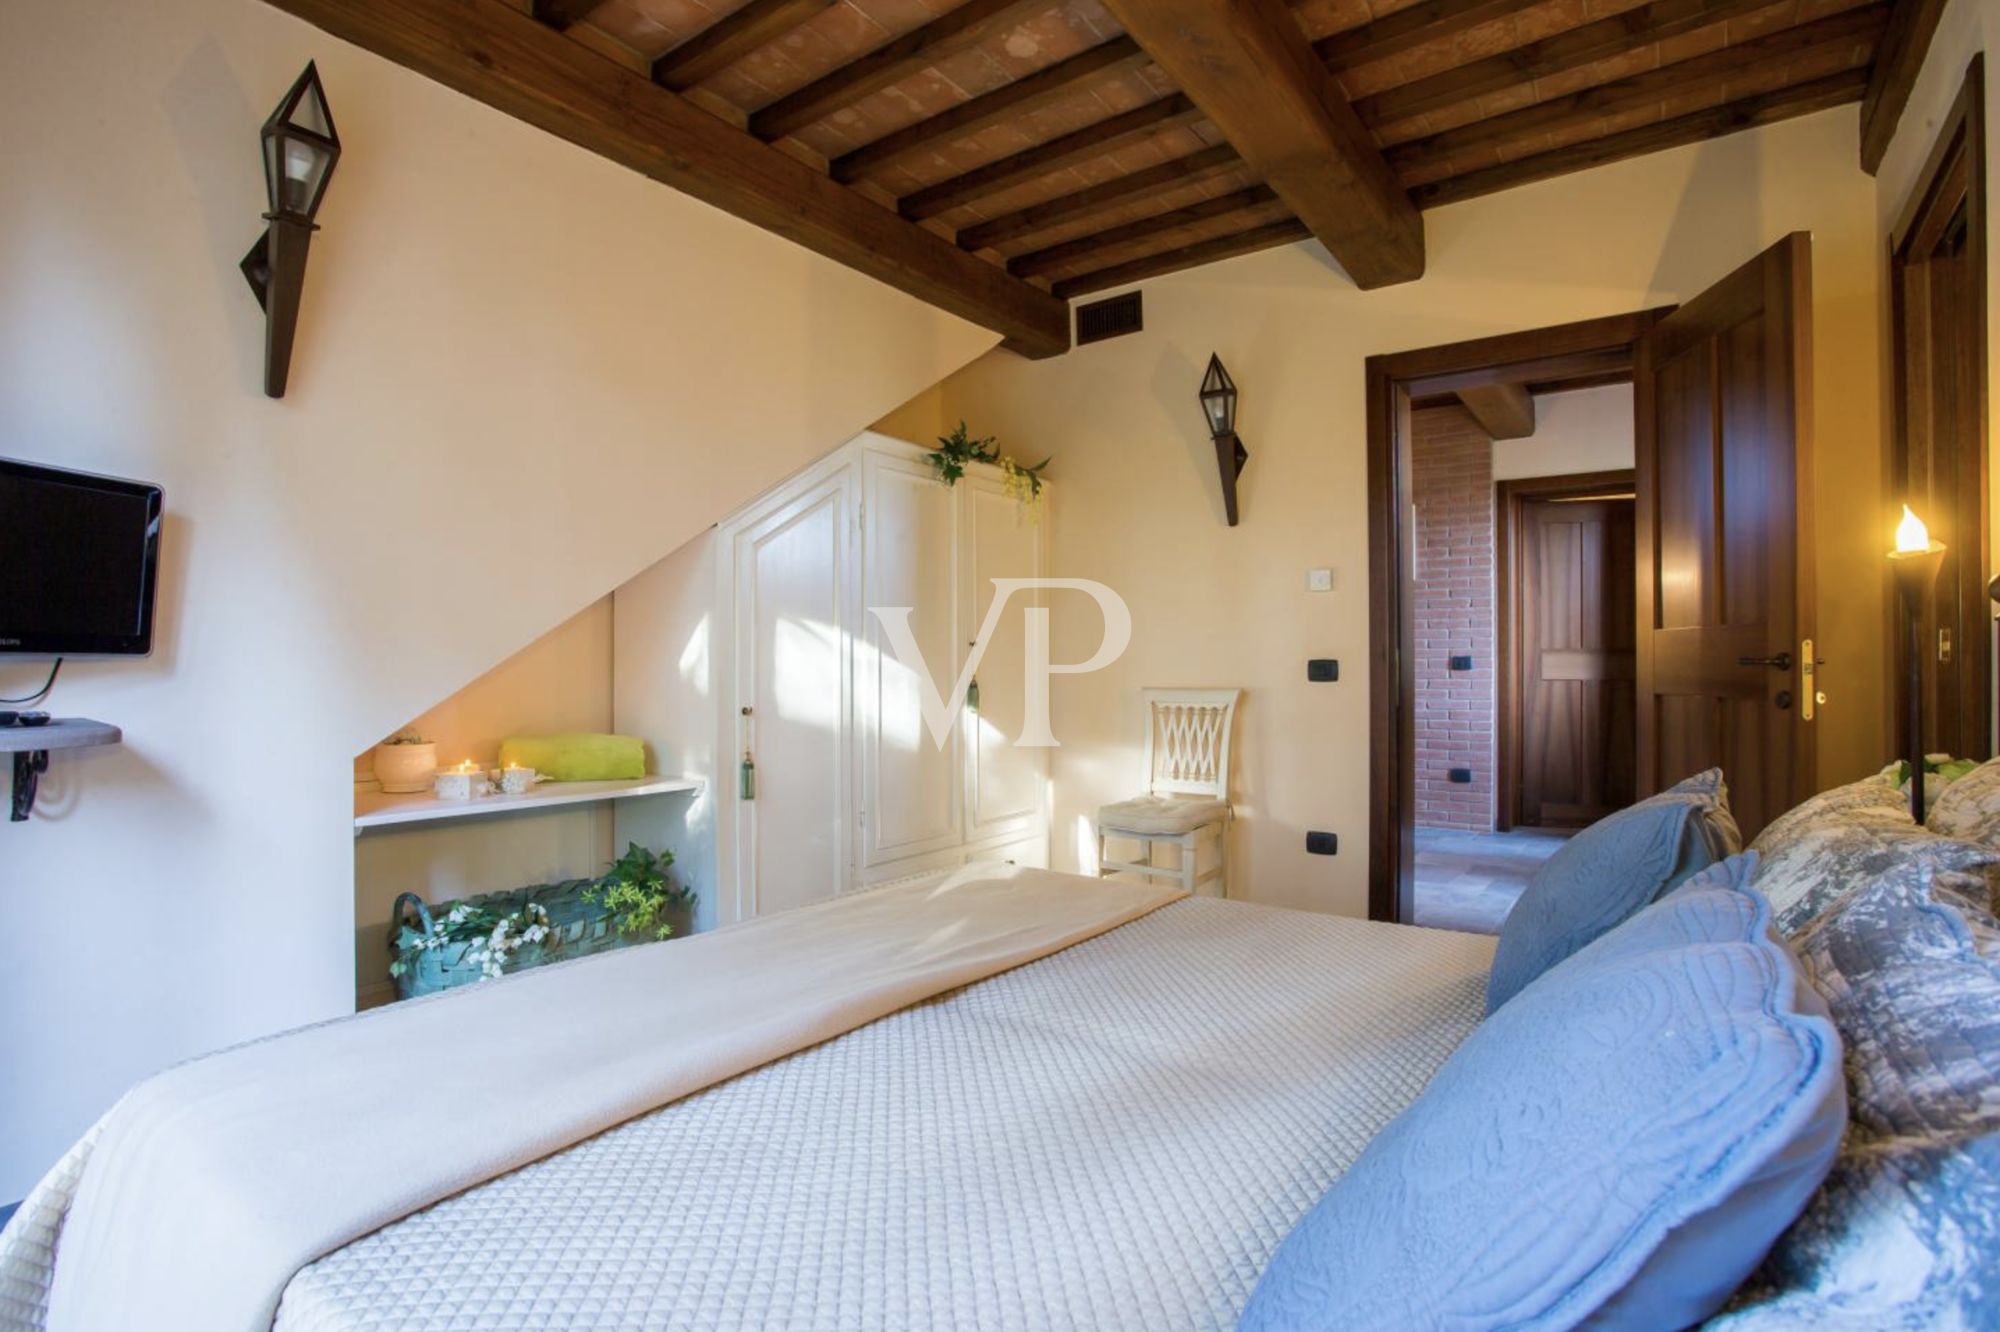 Beautiful 19th century Tuscan farmhouse in historic village with breathtaking views